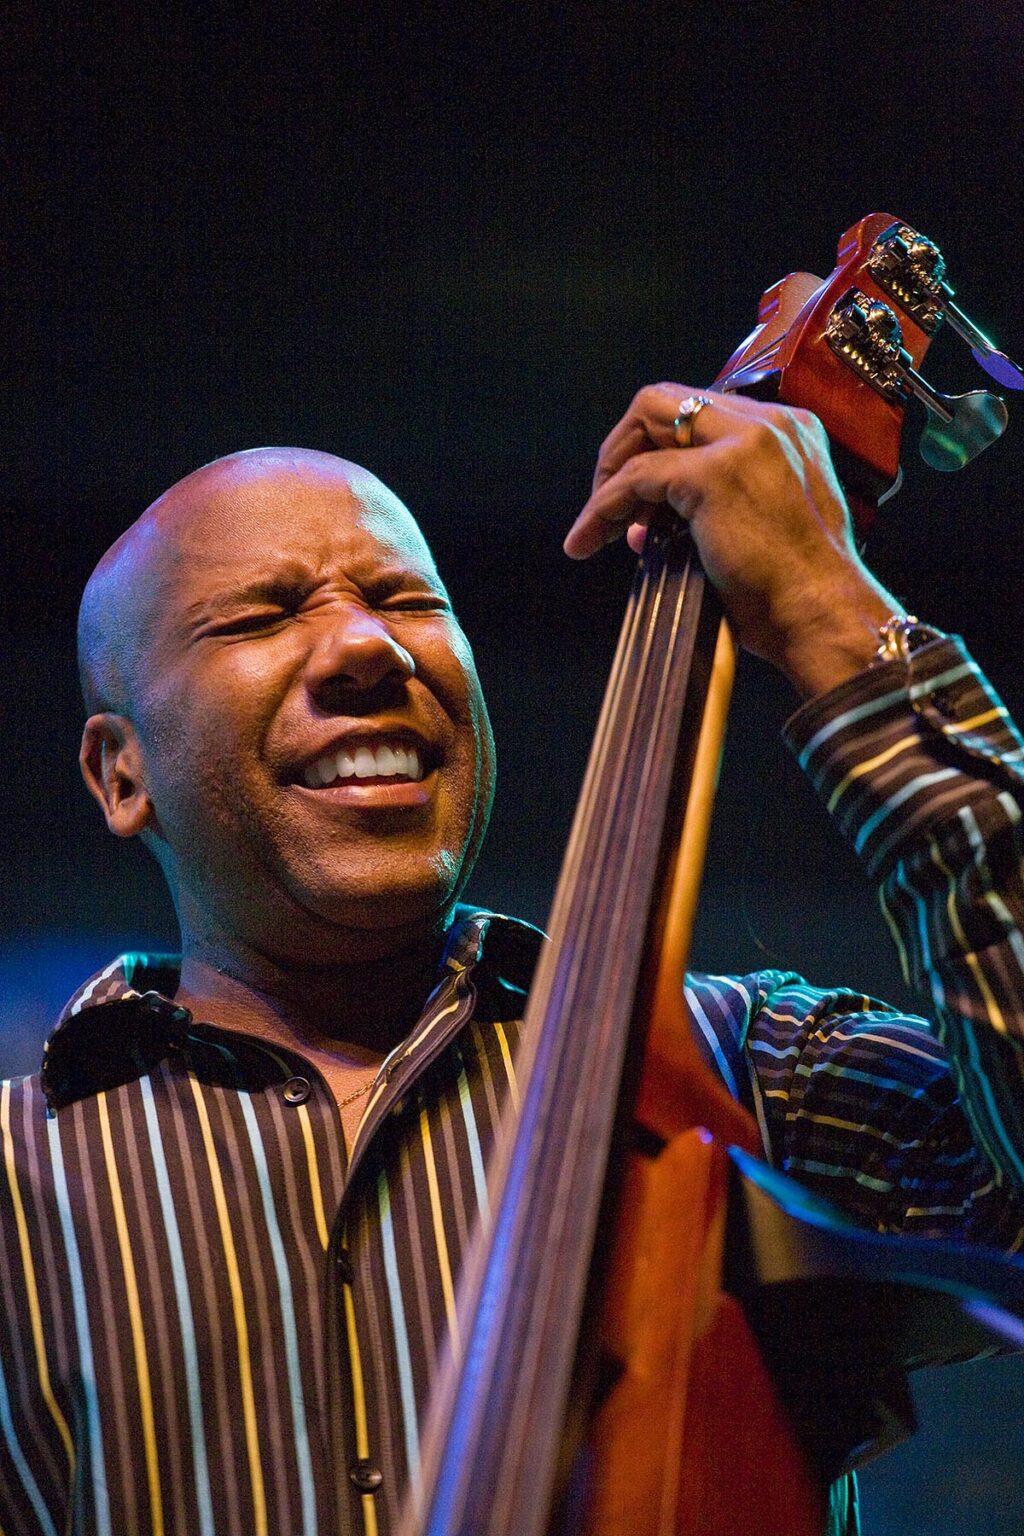 NATHAN EAST plays the stand up base for HERBIE HANCOCK at the 51st MONTEREY JAZZ FESTIVAL - MONTEREY, CALIFORNIA